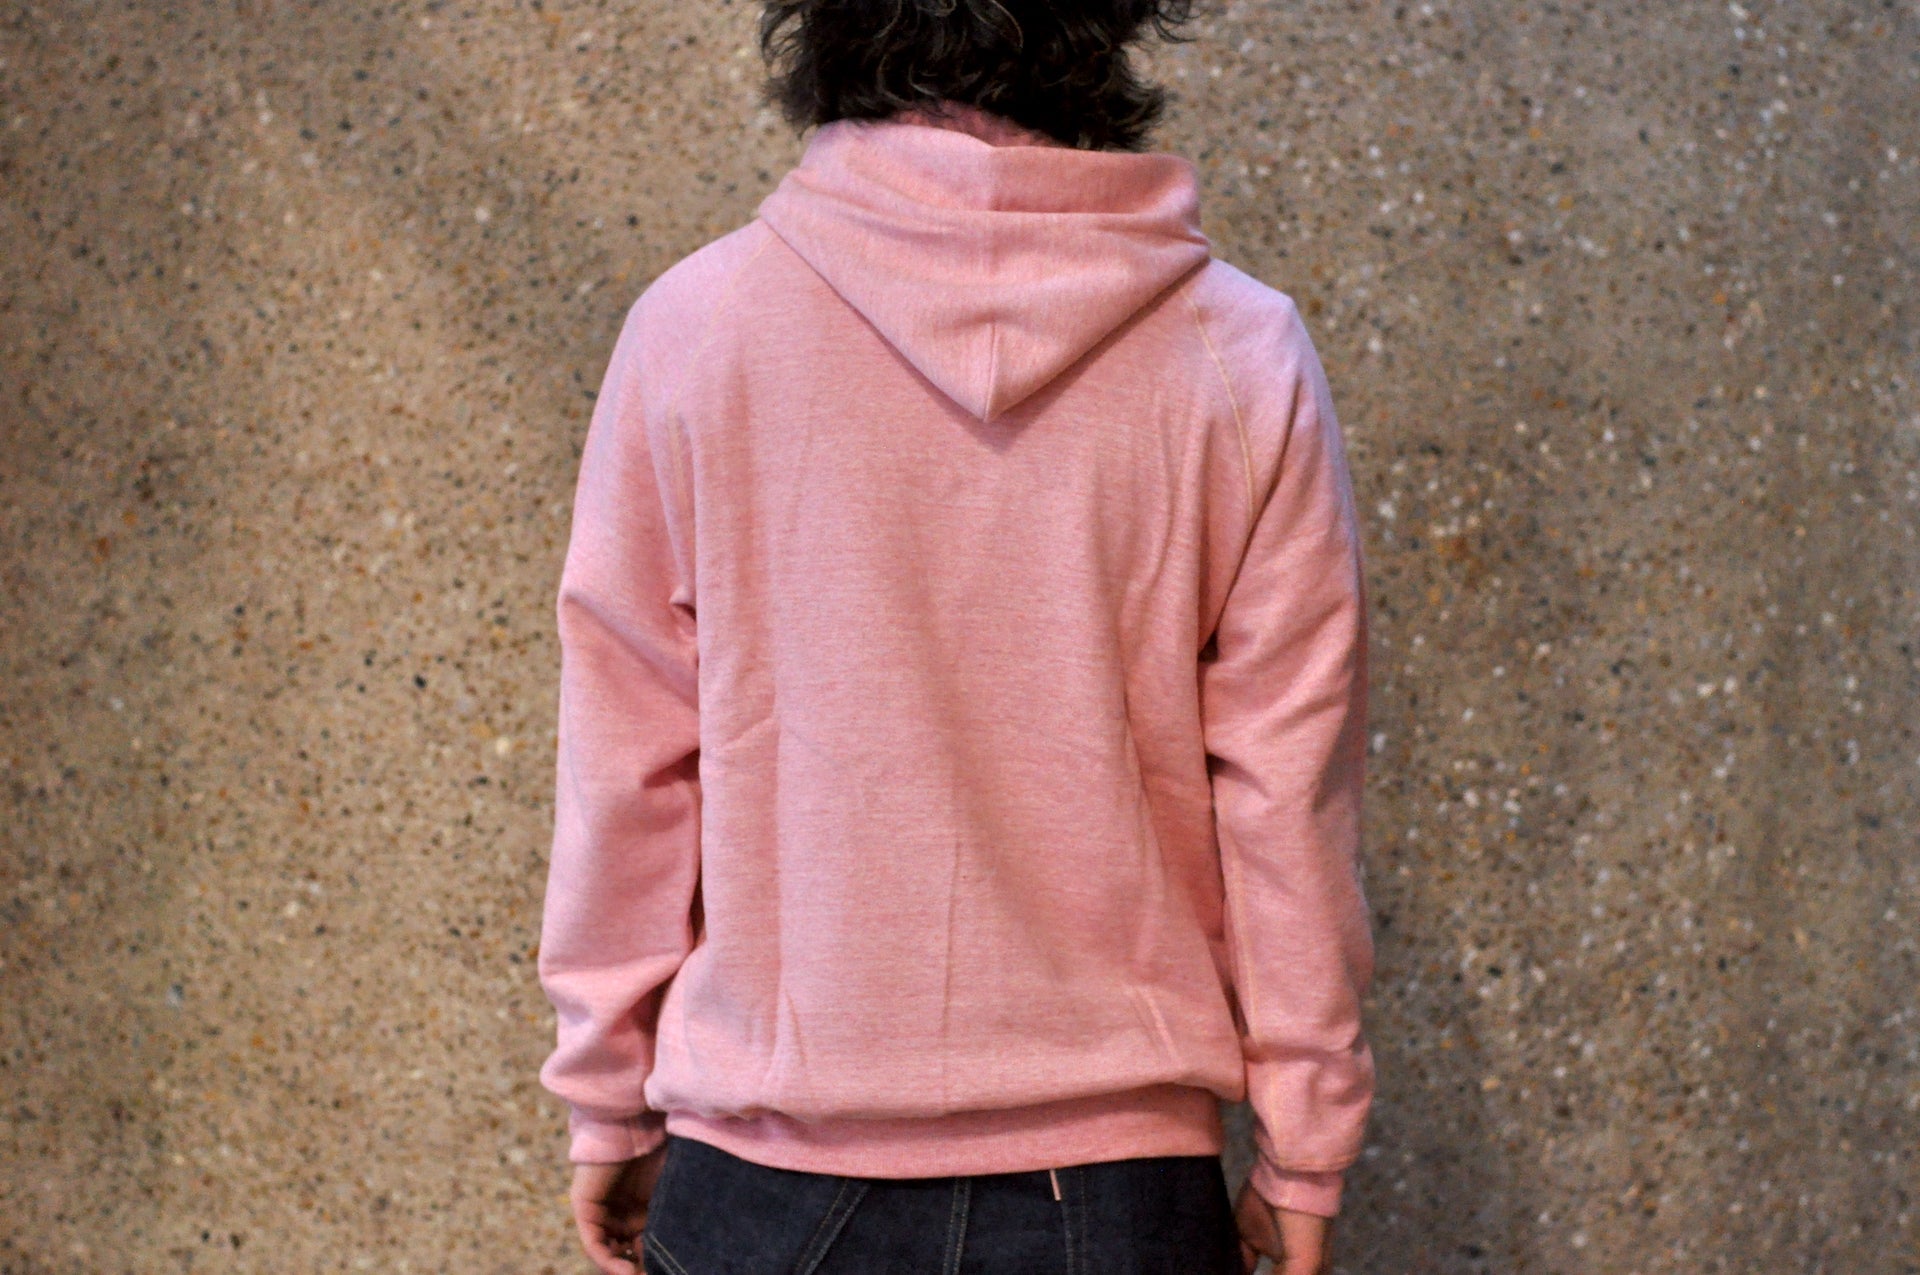 Denime X Warehouse Co. Lot.270 10oz Loopwheeled Pullover (Heather Red)